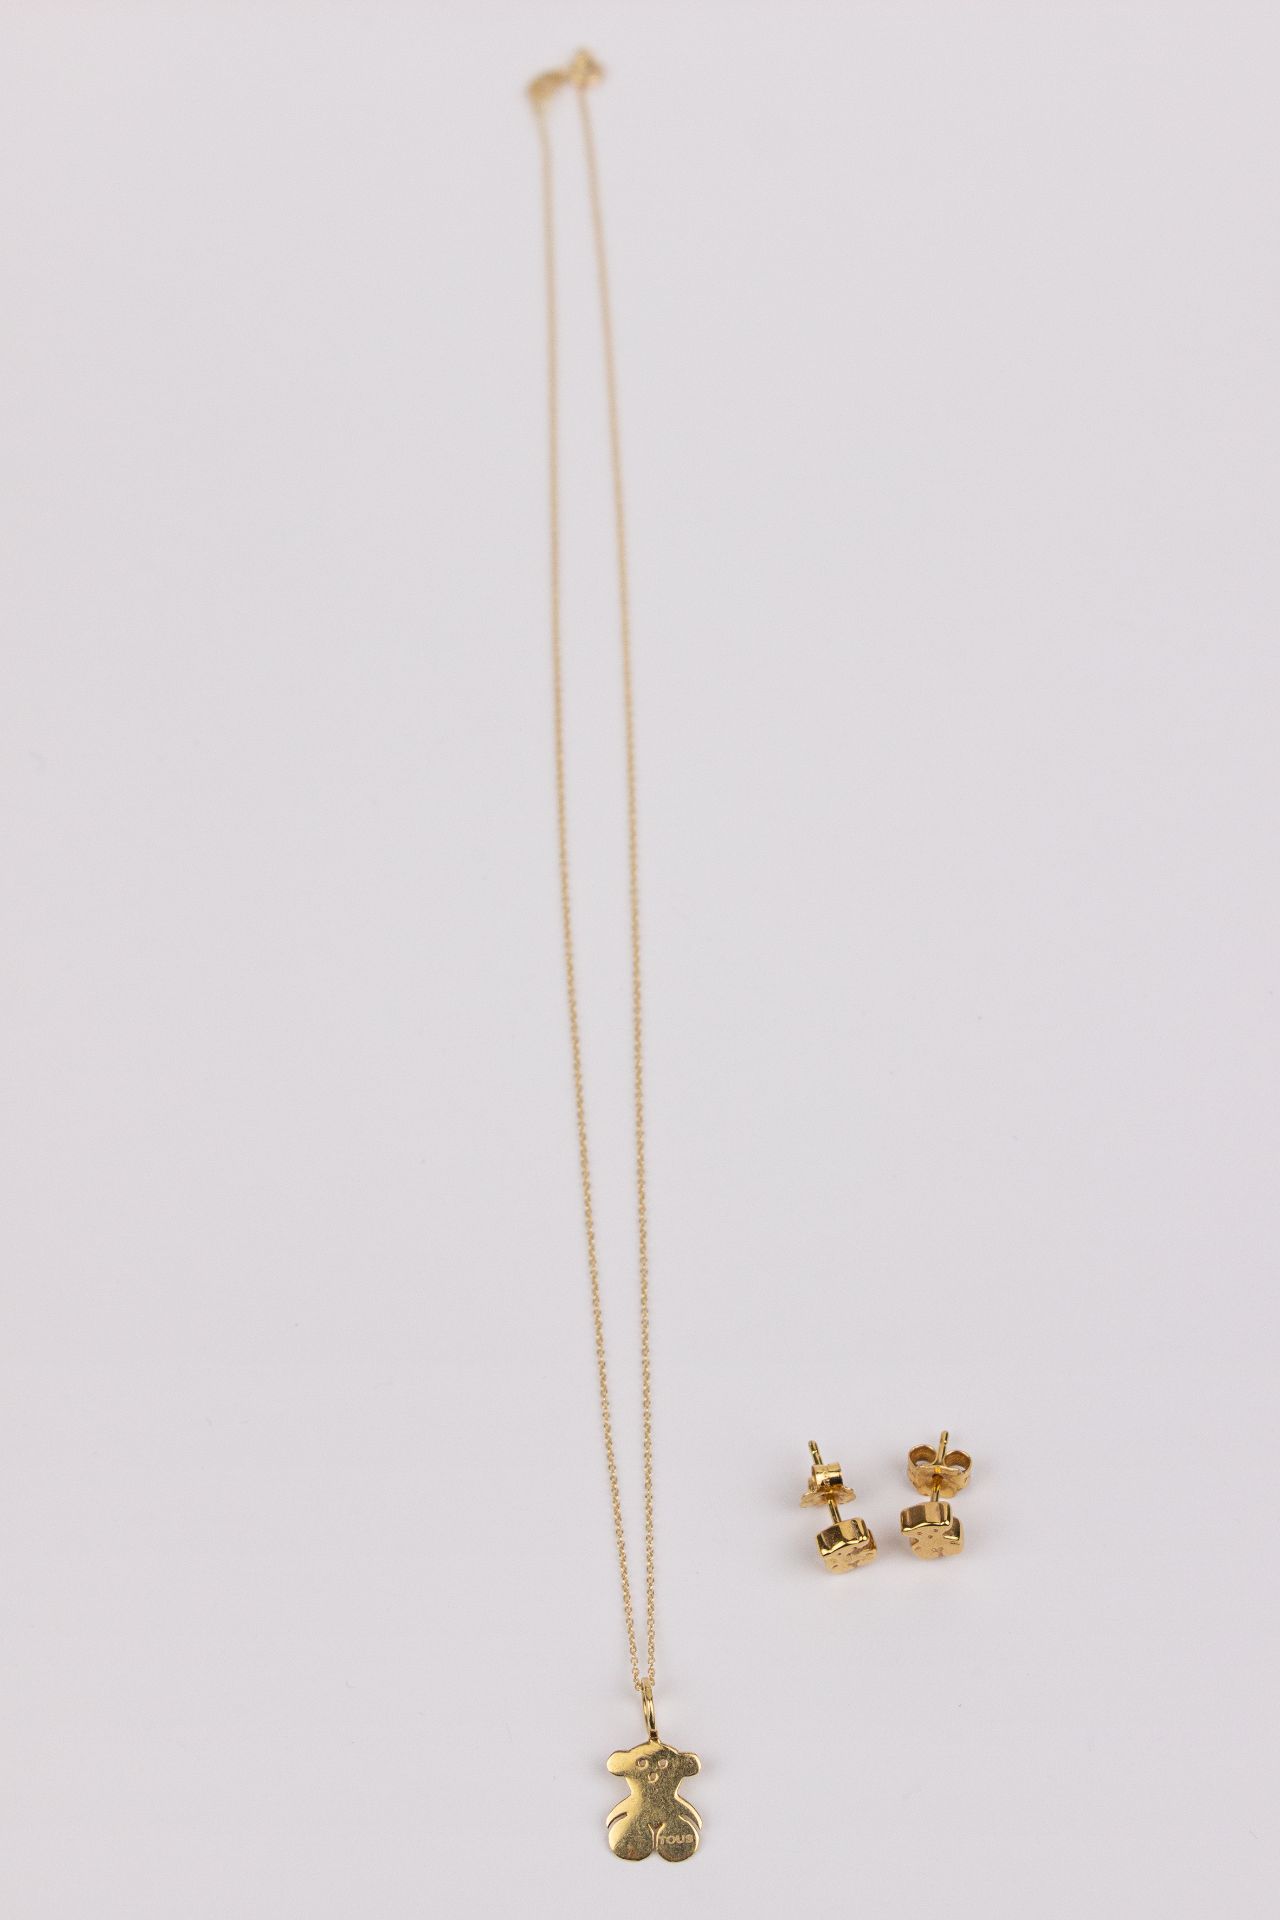 Tous. Set of 18k. yellow gold pendant and earrings - Image 2 of 2